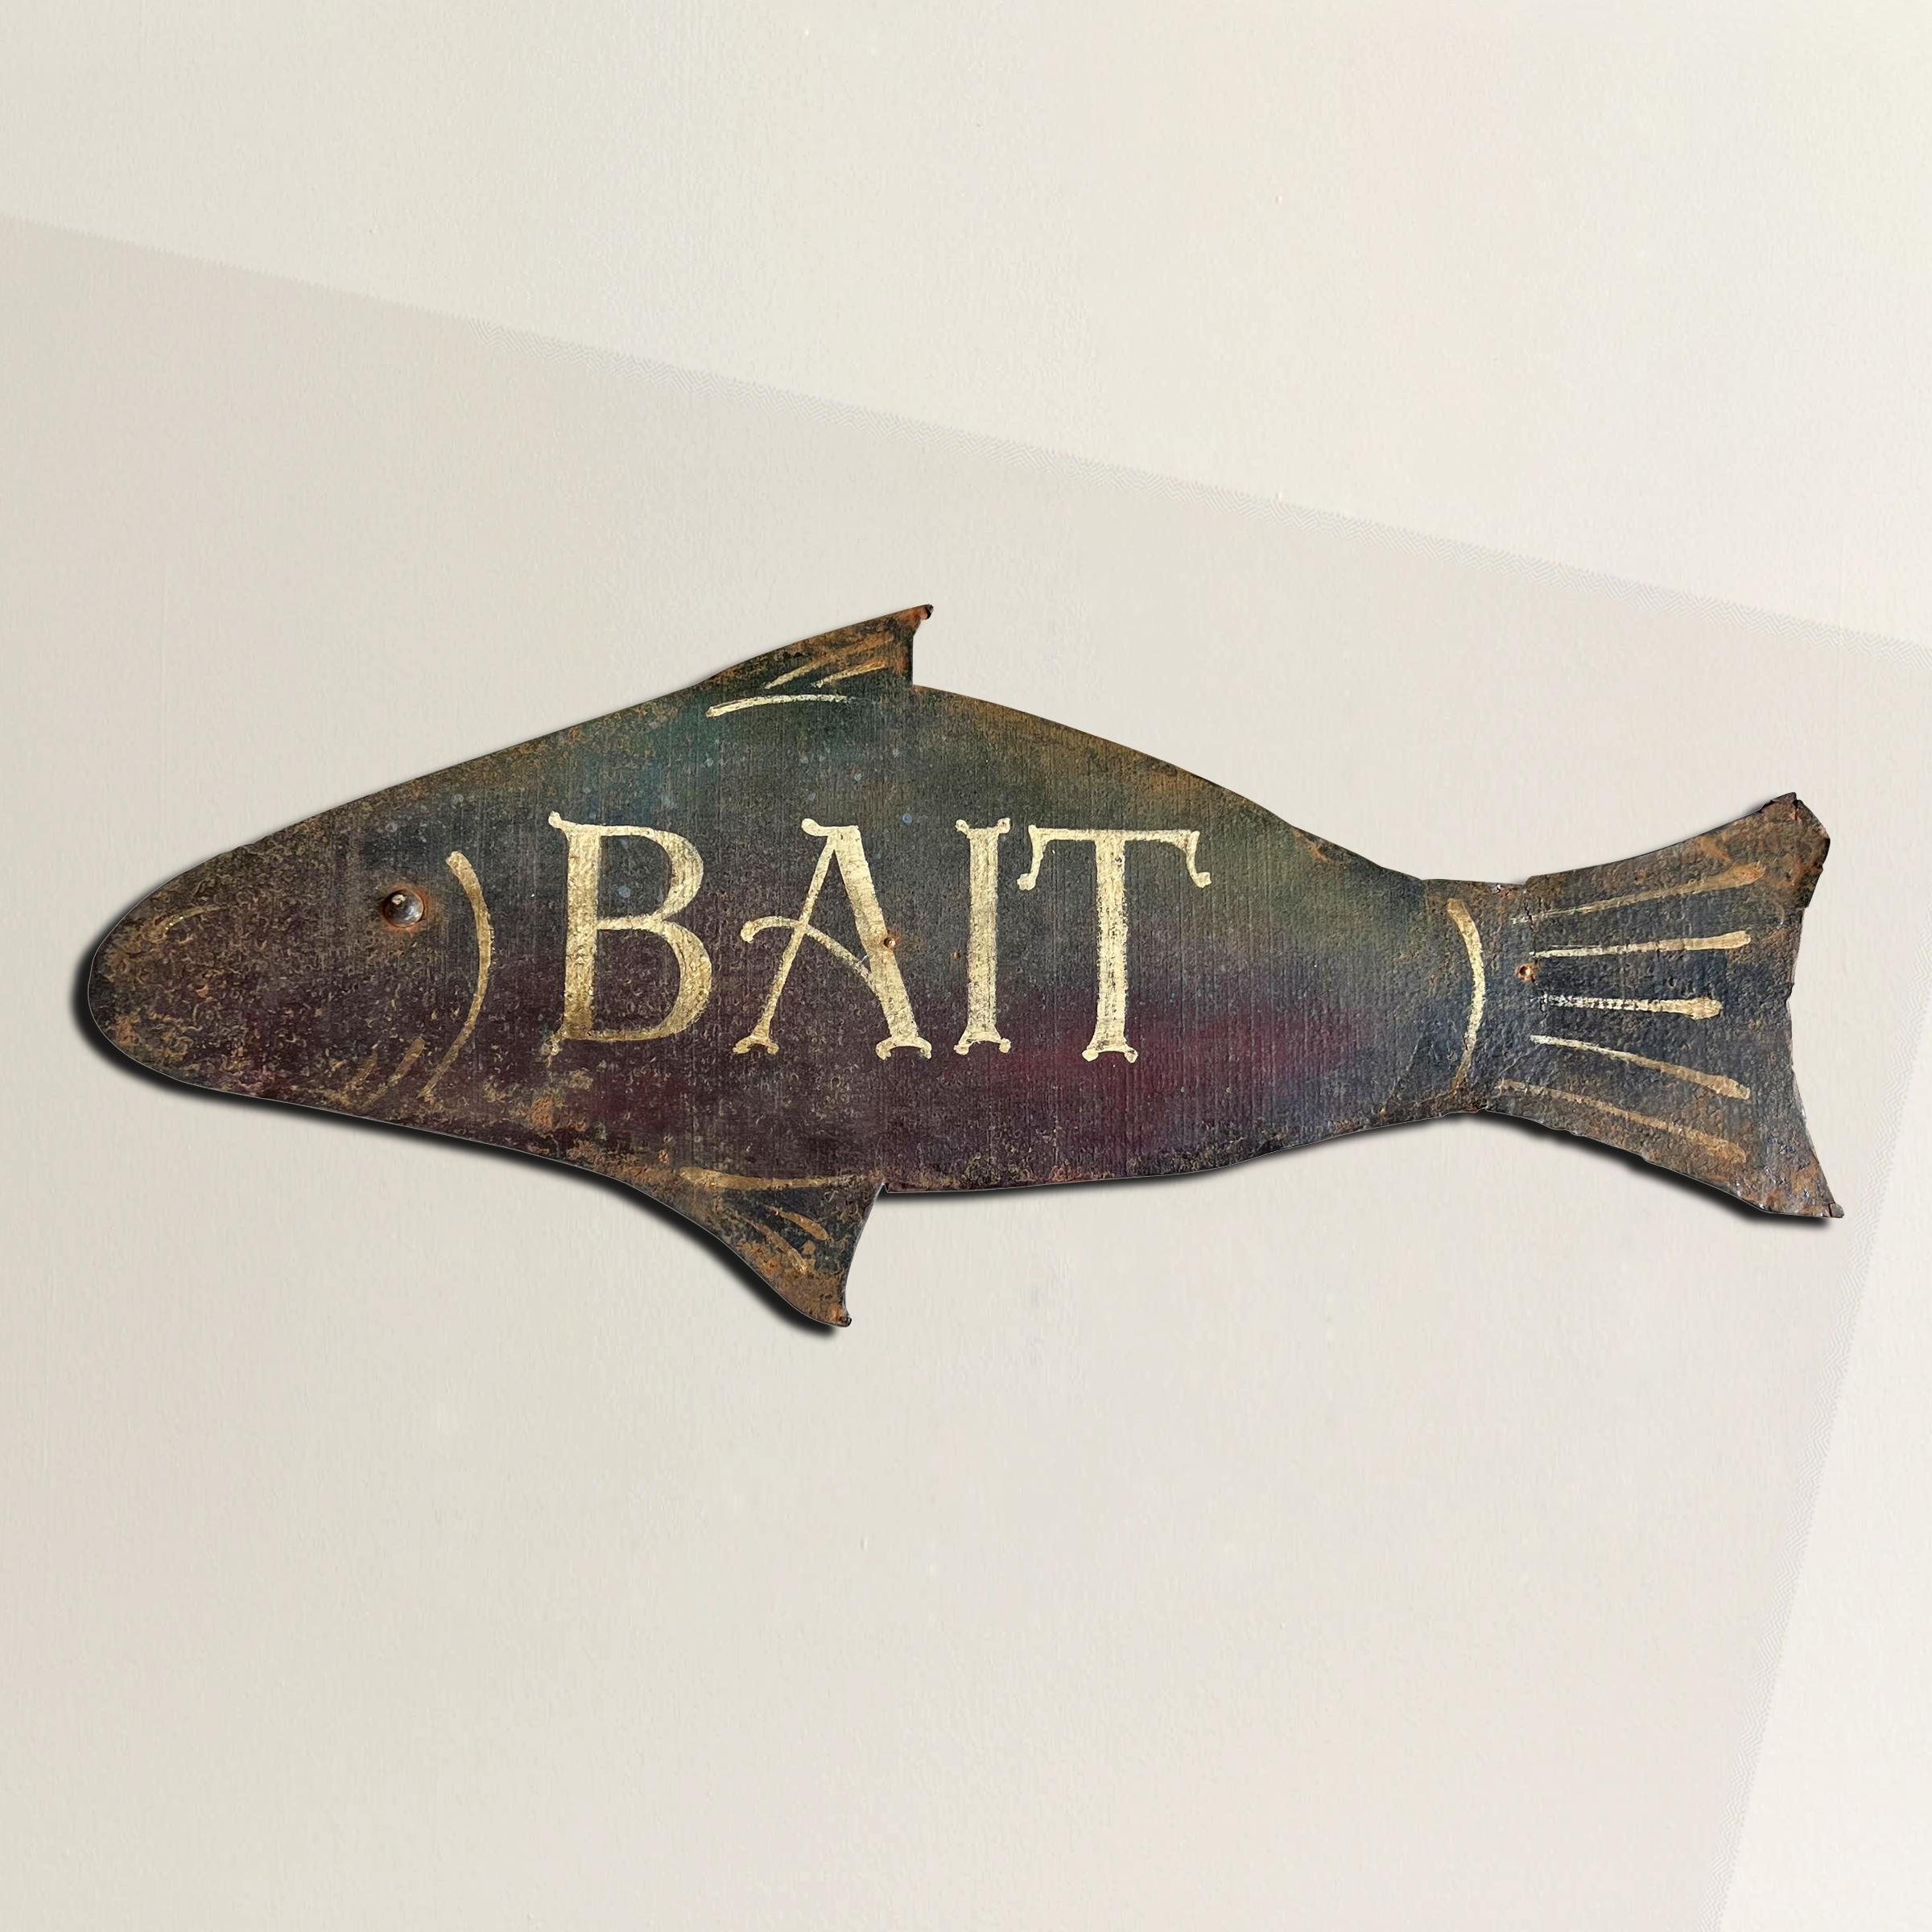 Experience a true treasure of American folk art with this exceptional early 20th-century sheet metal bait shop sign, expertly crafted in the shape of a rainbow trout. Originally created for a bait shop nestled in the scenic landscapes of northern